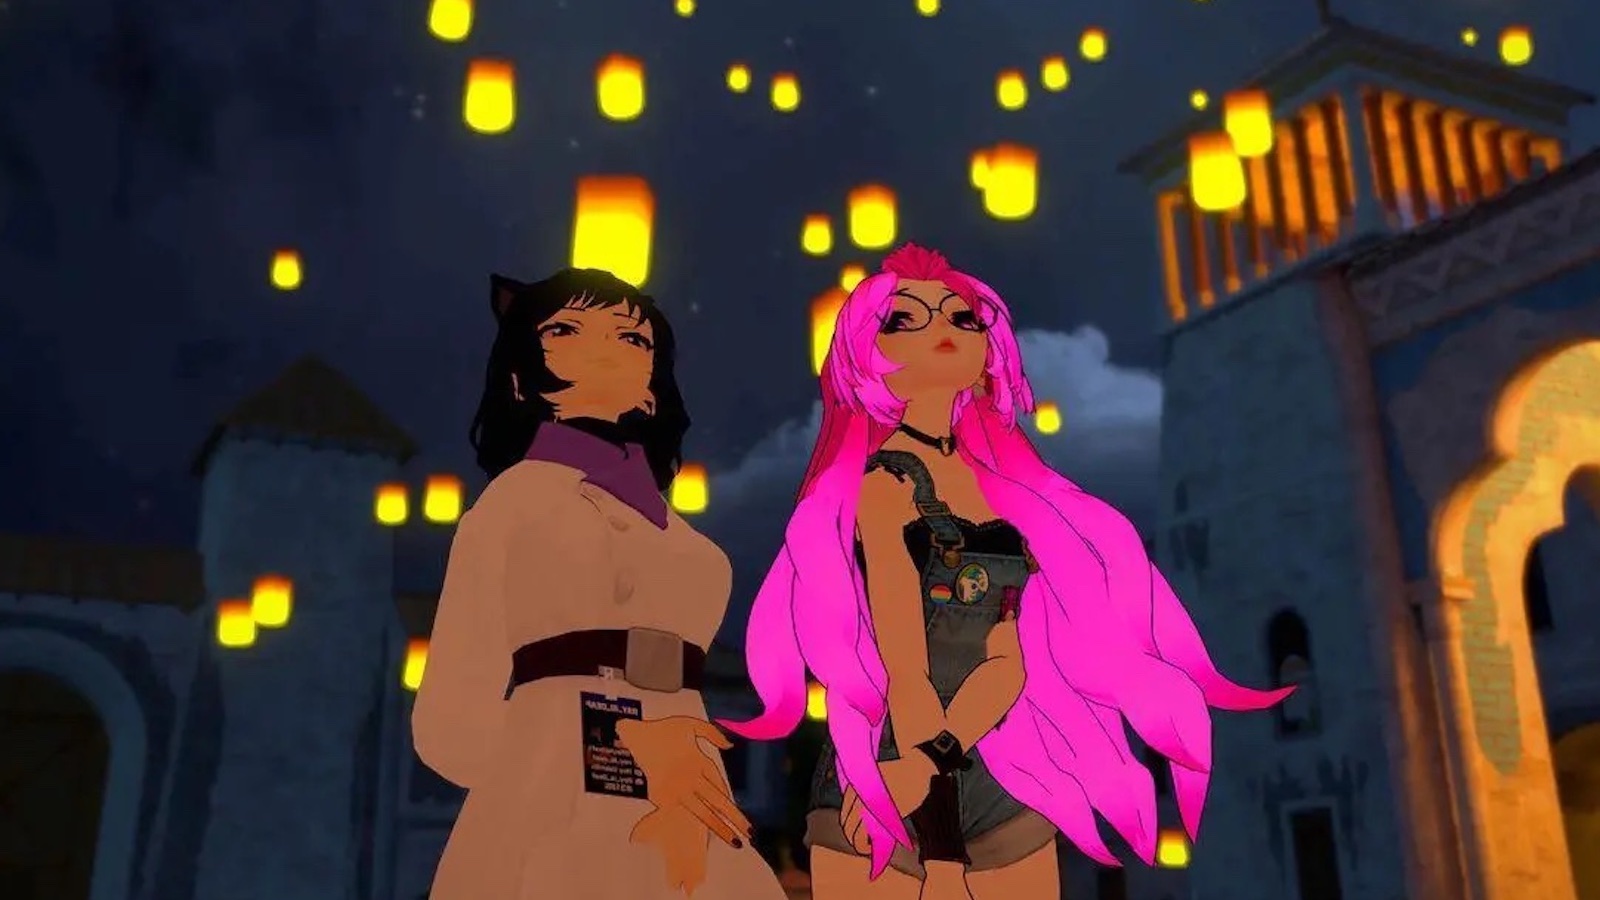 Two animated women, one brunette and one with long pink hair, look up to the sky against a backdrop of glowing floating lanterns